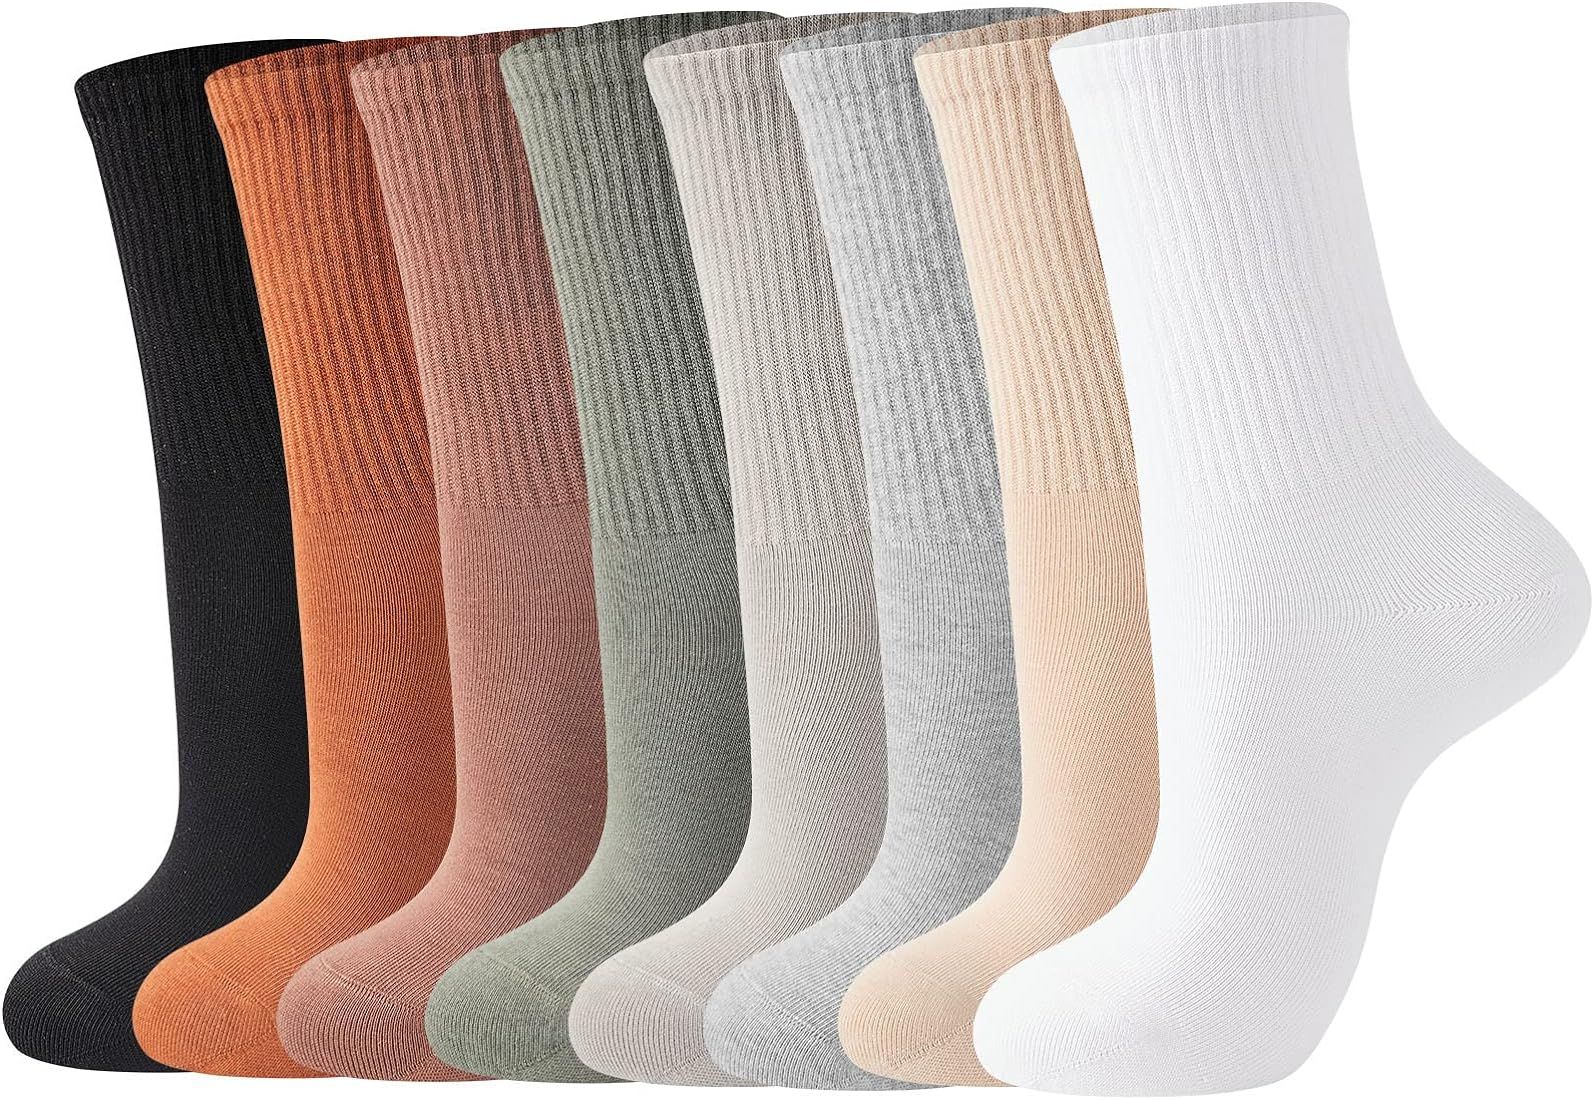 J-BOX Womens Cotton Crew Socks, Thin Soft Comfort Breathable Dress Socks, Above Ankle Crew Socks for Business, Casual. | Amazon (US)